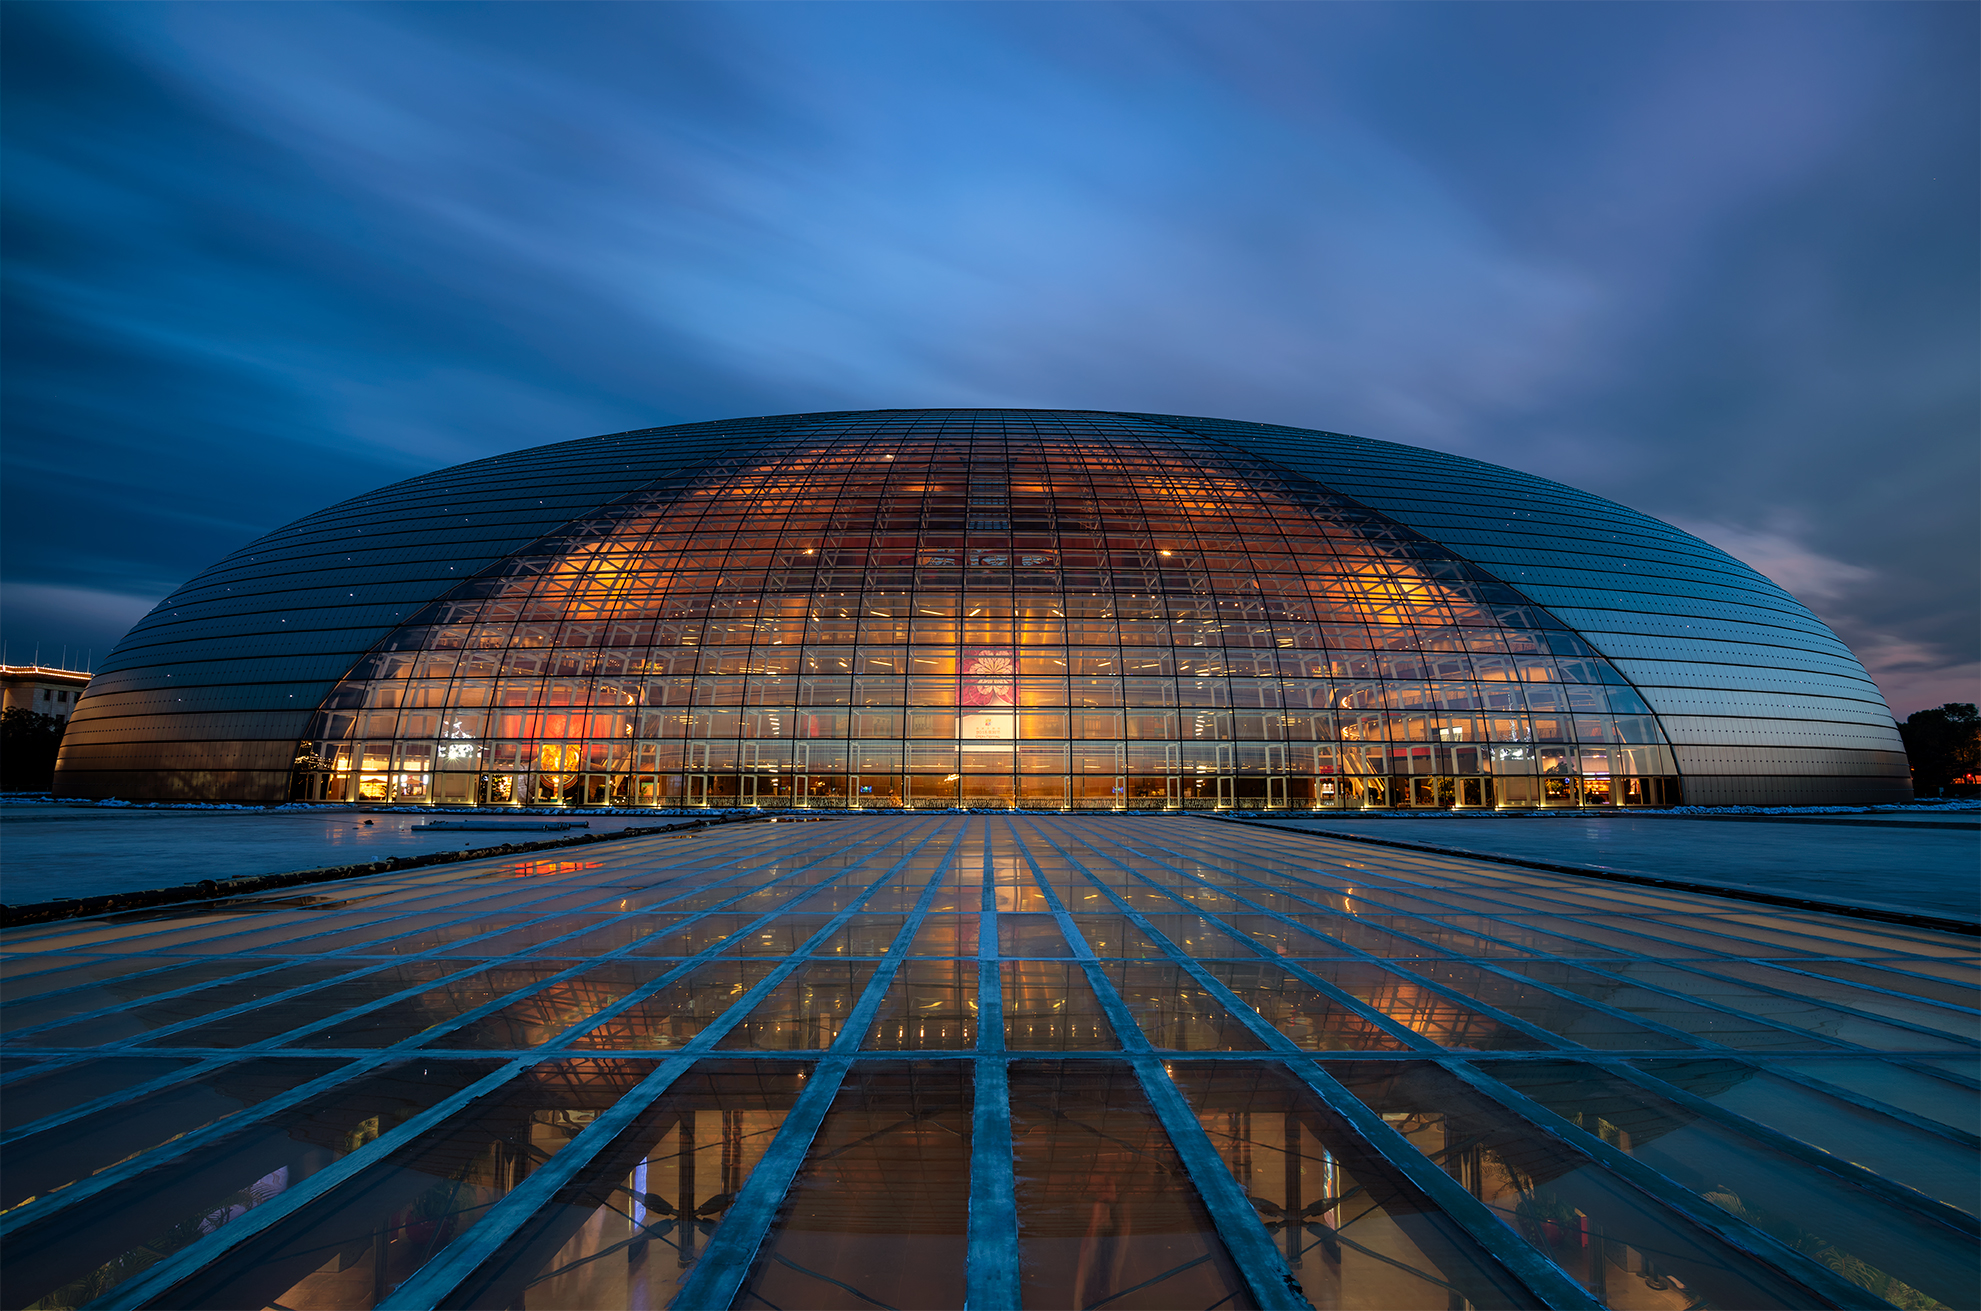 evening blue hour, looking upon the massive egg-shaped architecture of the Beijing National Center of Performing Arts